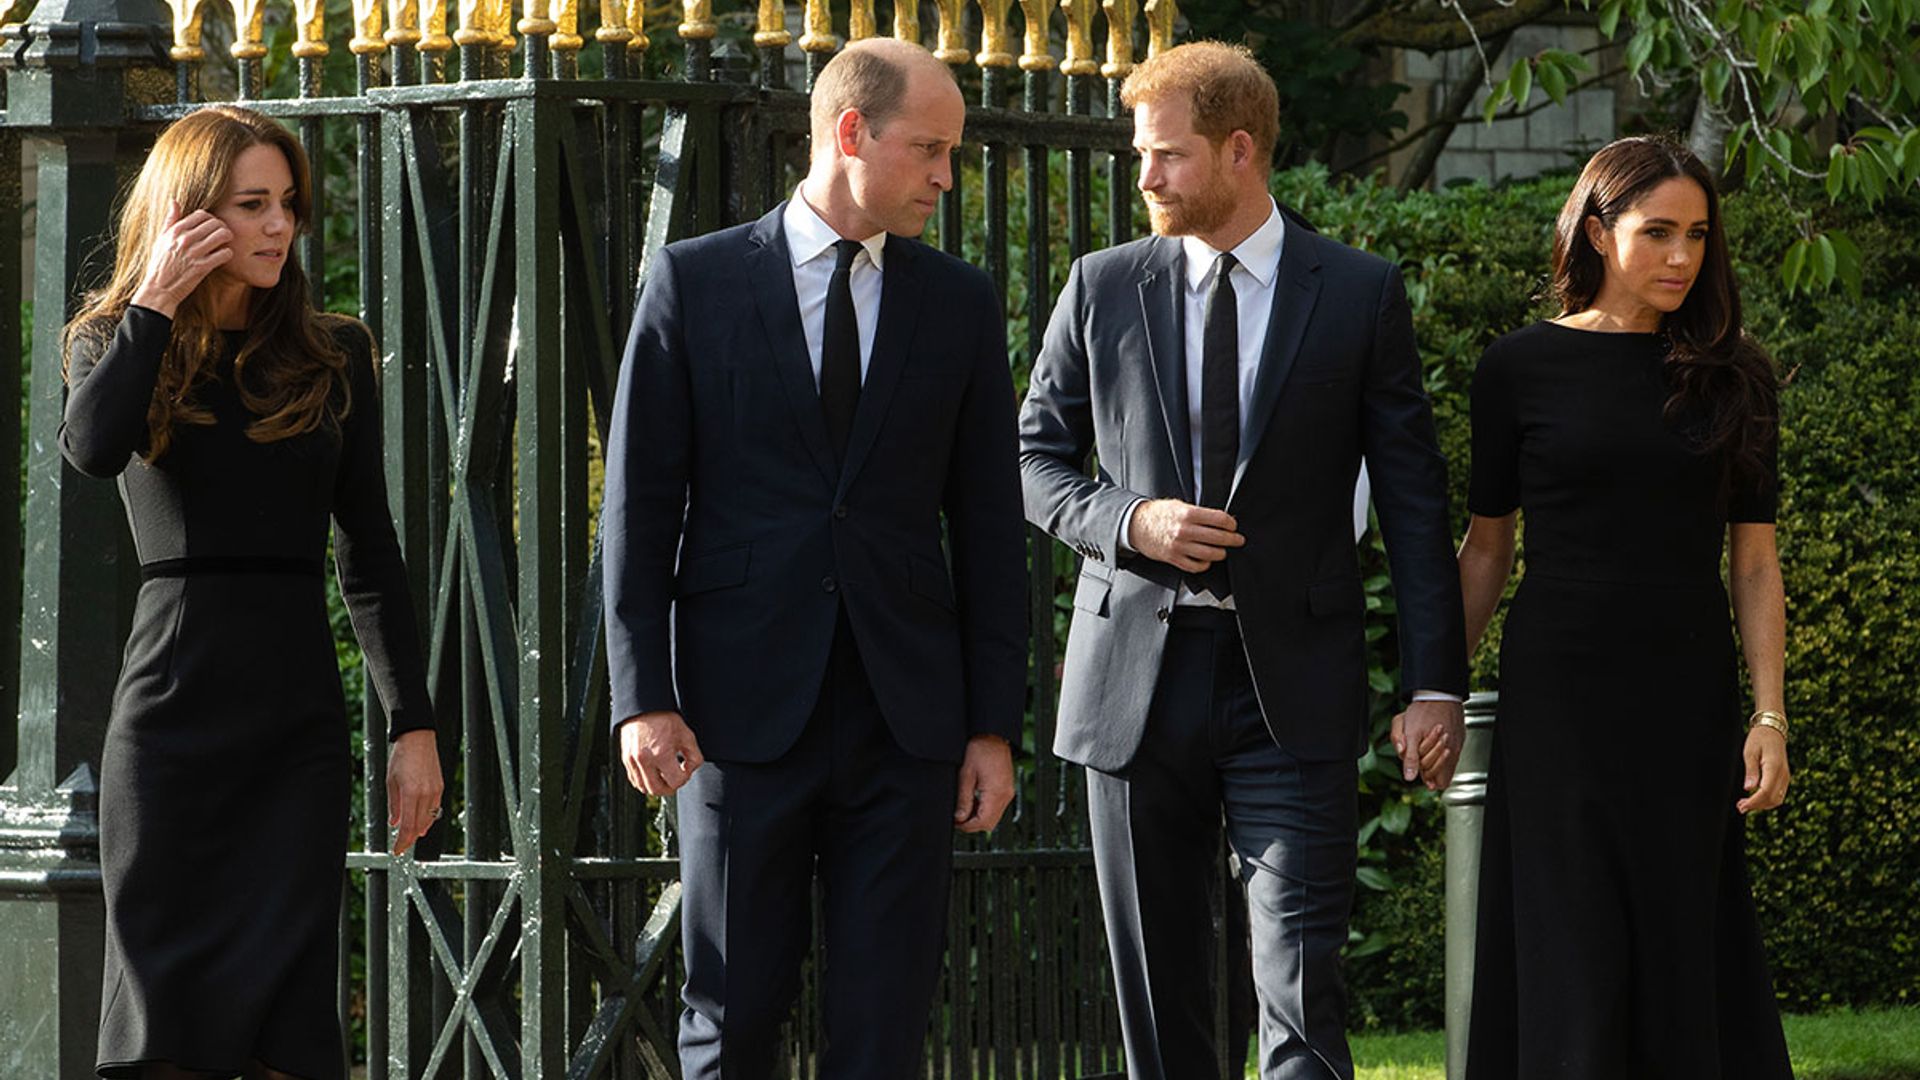 Prince Harry and Prince William made effort to heal rift, claims Meghan Markle’s friend